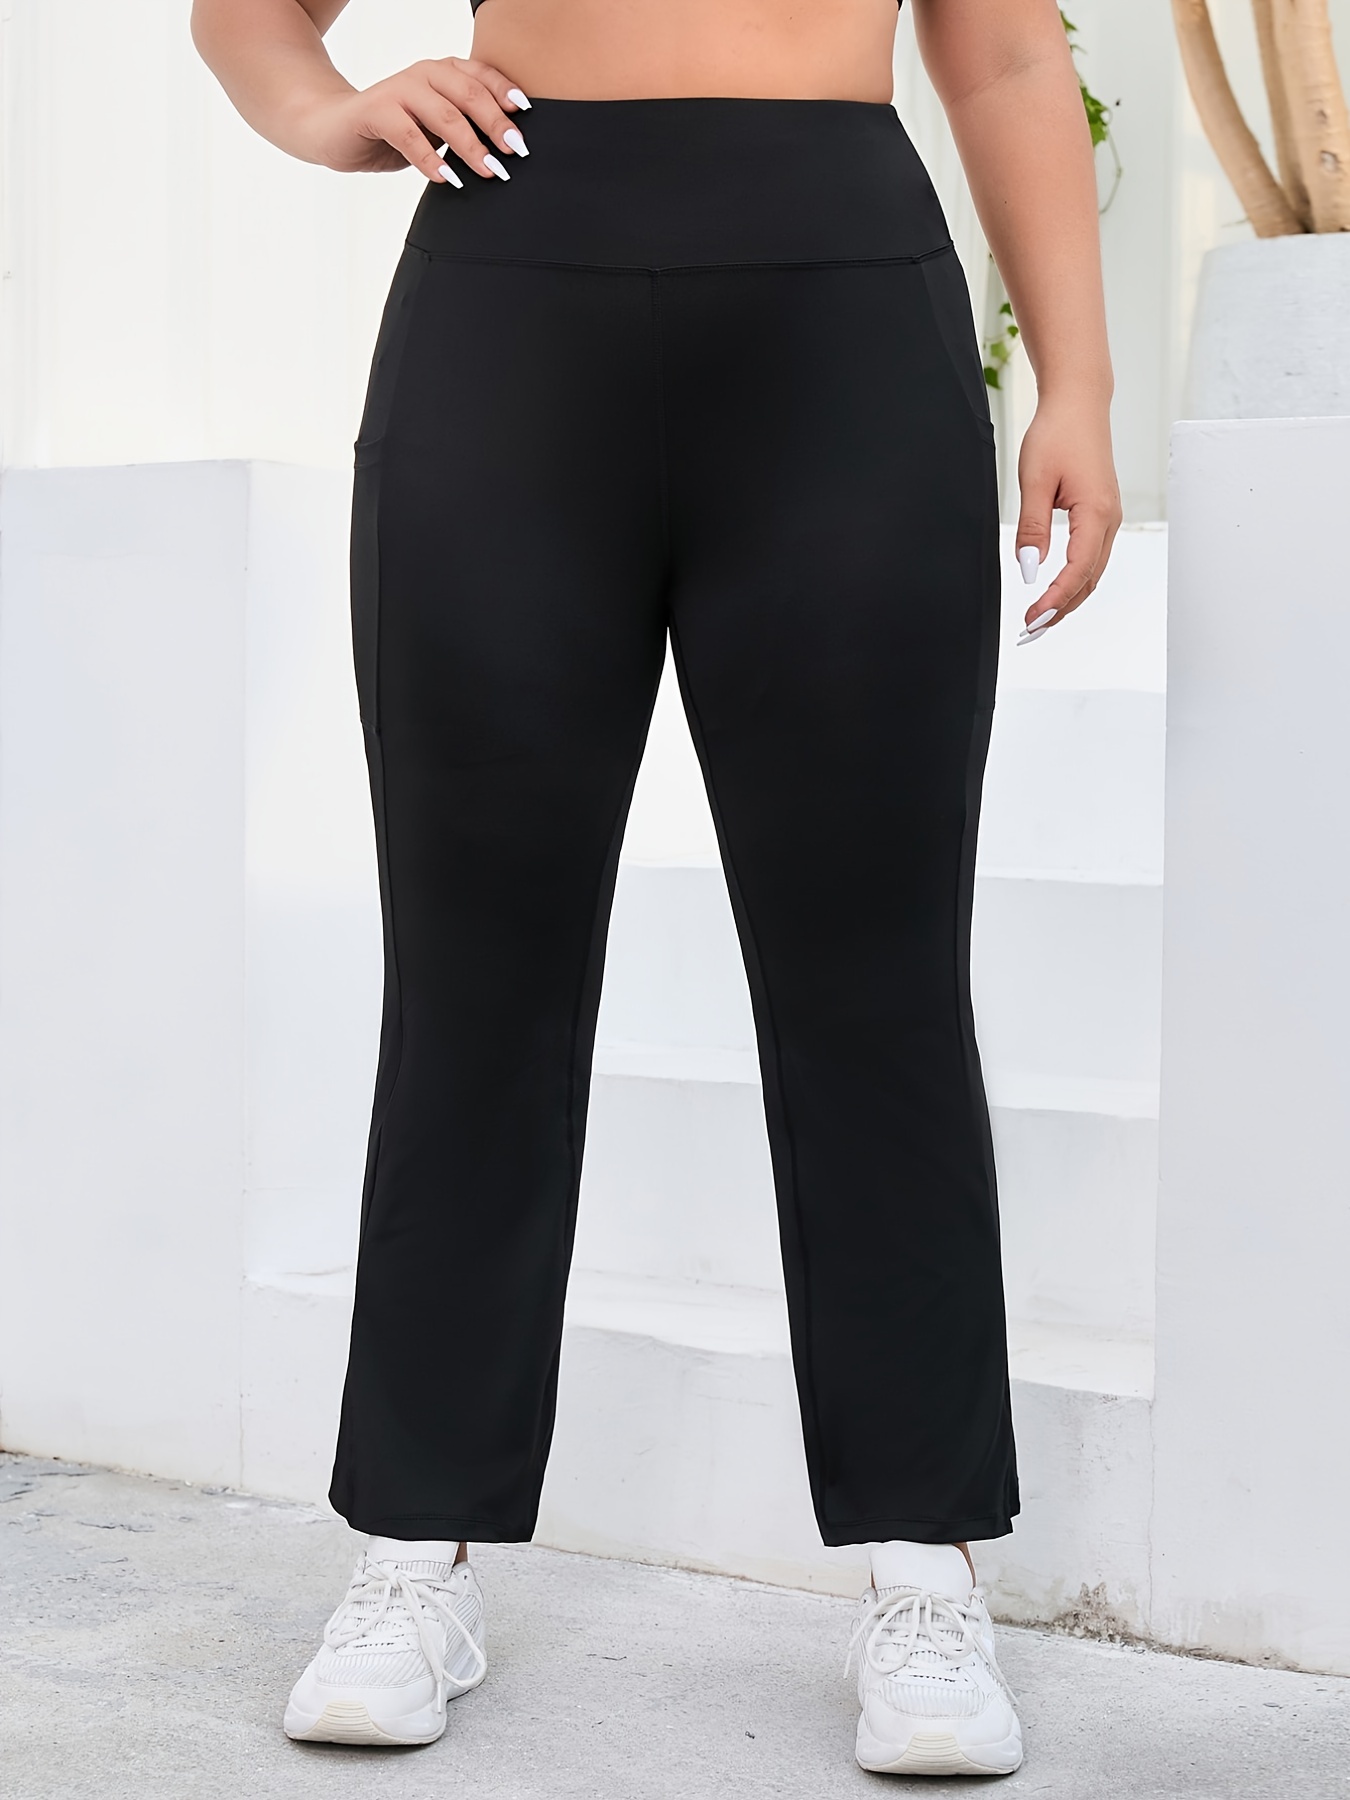 * Yoga Leggings With Pockets For Women, High Waisted Workout Yoga Pants  Tummy Control, Athletic Butt Lifting Leggings